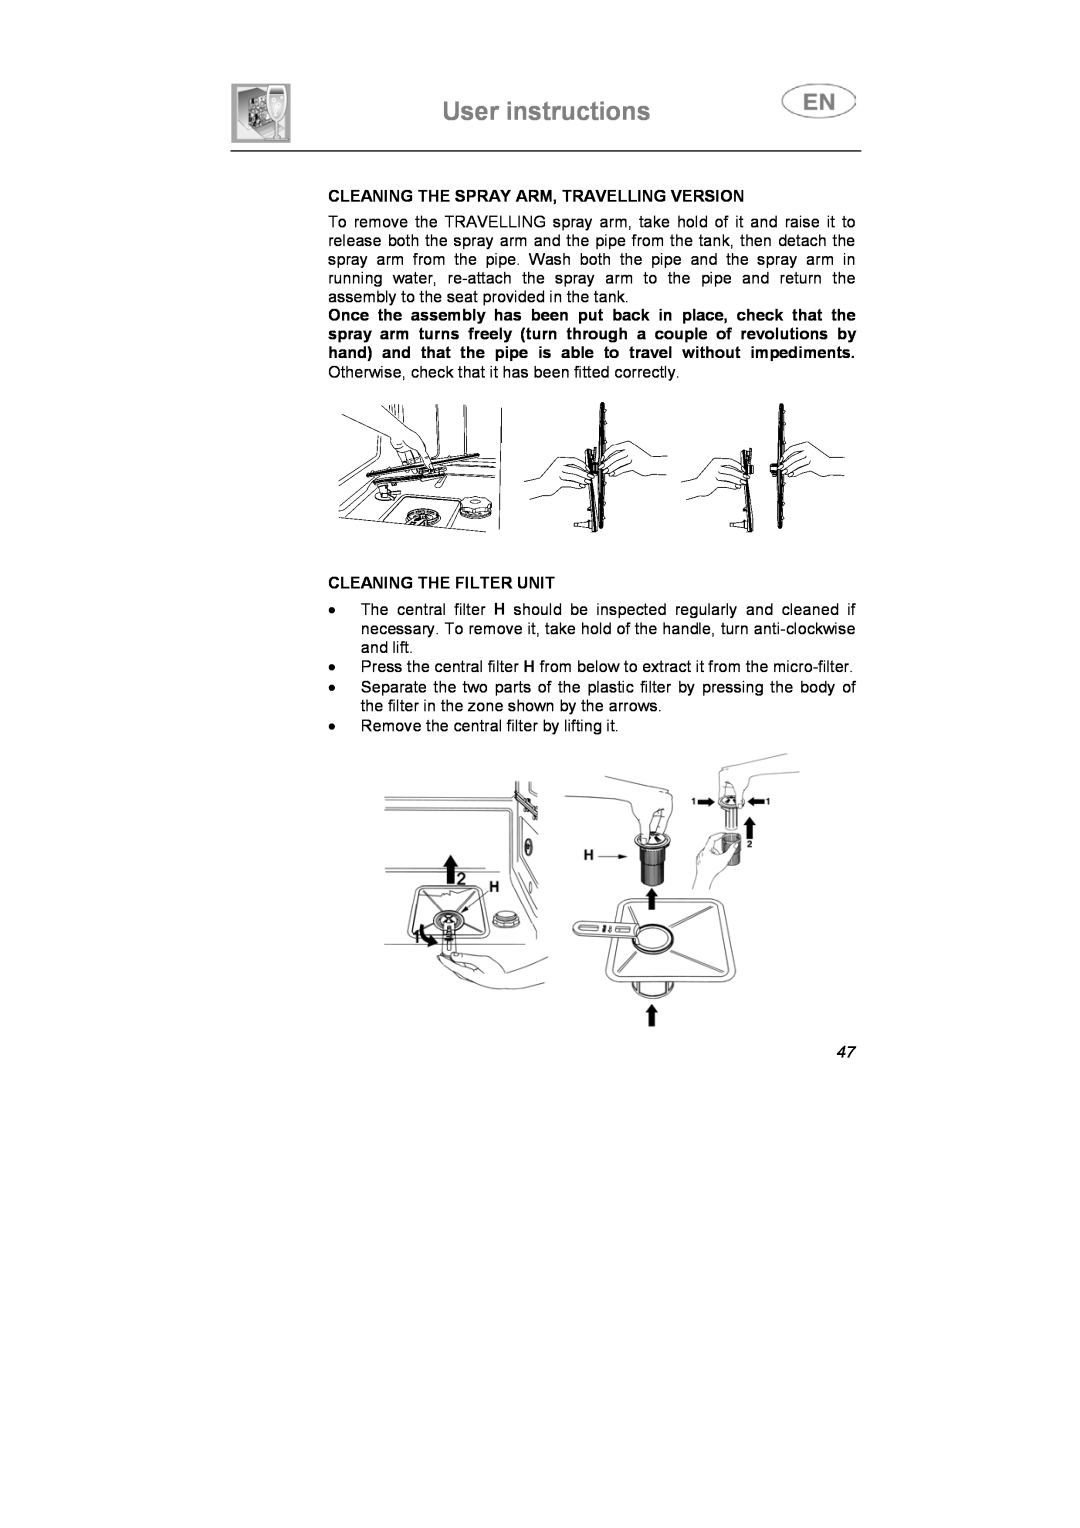 Smeg LS4647XH7 instruction manual User instructions, Cleaning The Spray Arm, Travelling Version, Cleaning The Filter Unit 